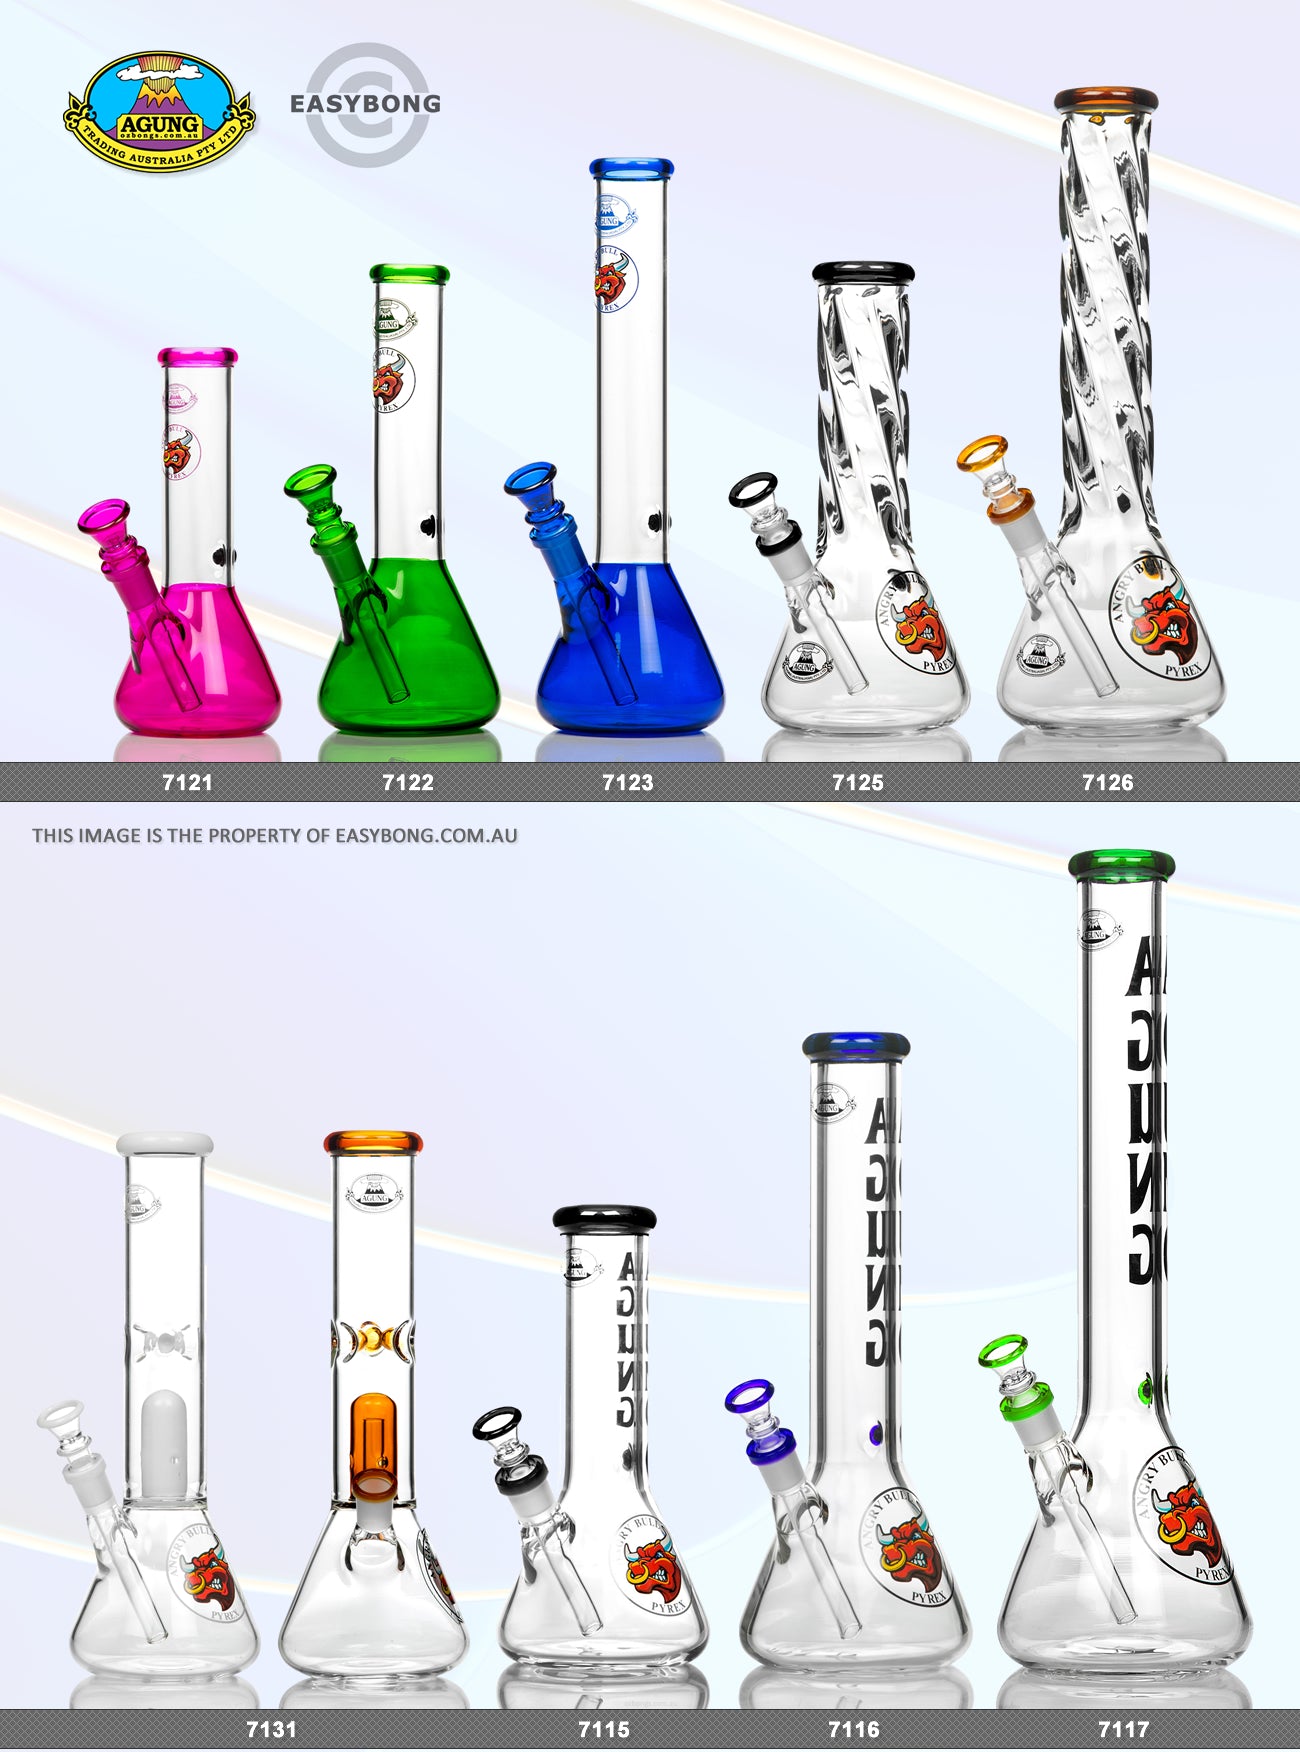 Catalogue of glass bongs for sale at Sydney Australia.